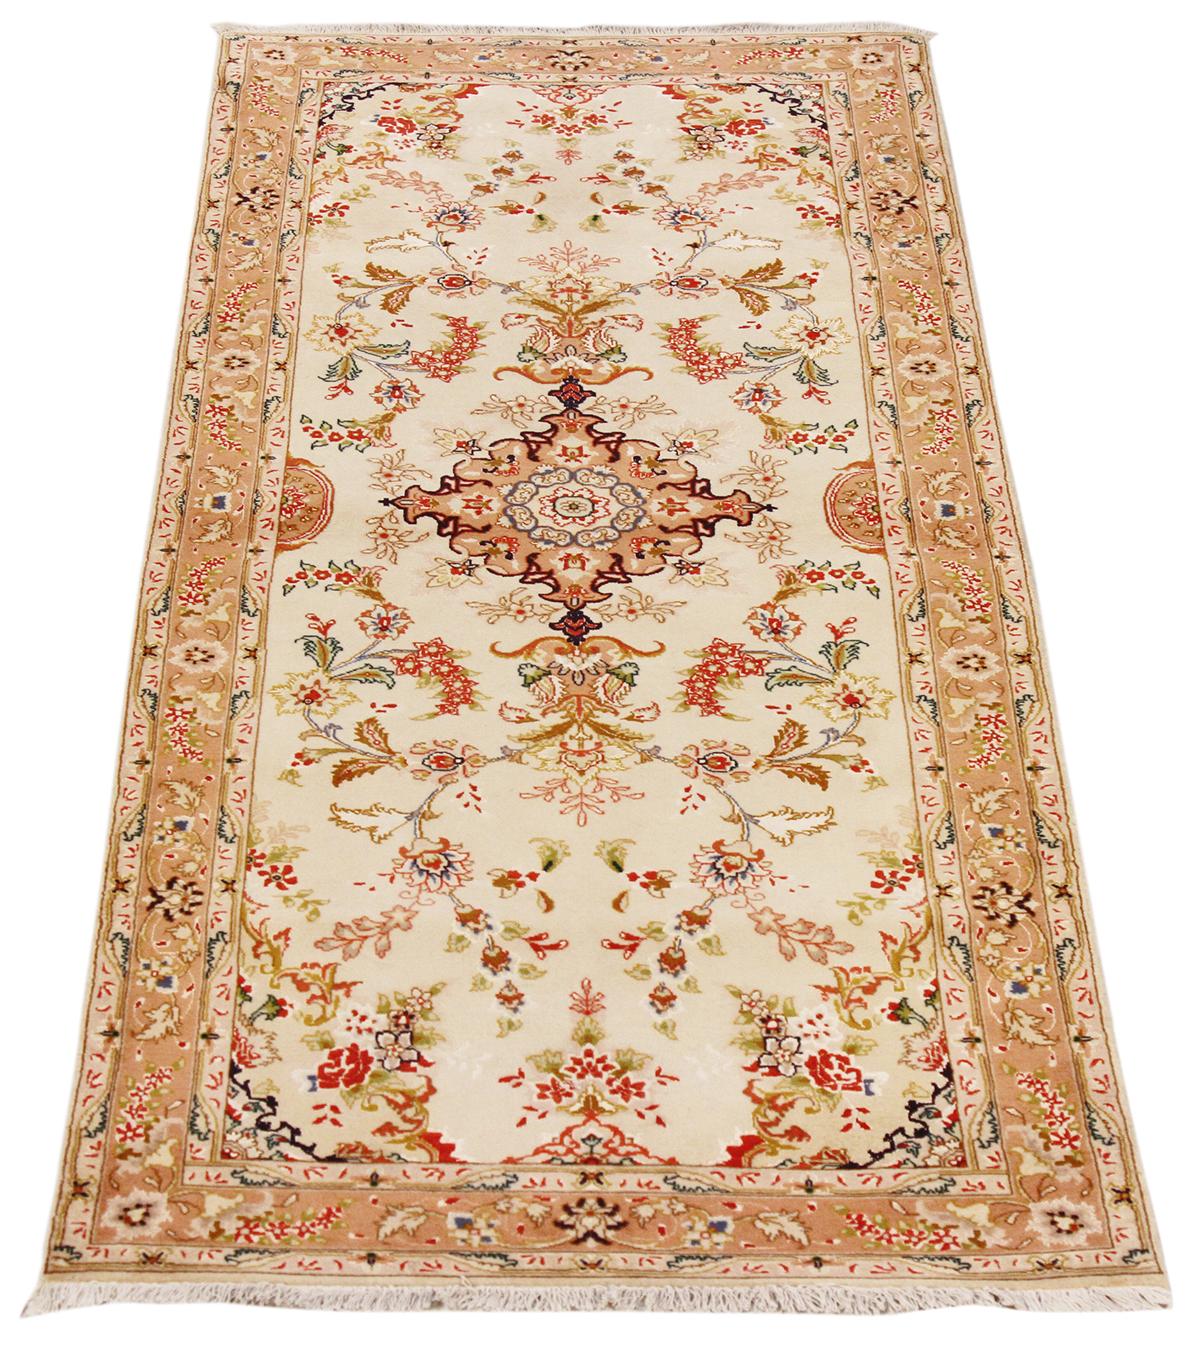 Antique Persian rug handwoven from the finest sheep’s wool and colored with all-natural vegetable dyes that are safe for humans and pets. It’s a traditional Tabriz weaving featuring a lovely ensemble of red and brown floral motifs over an ivory